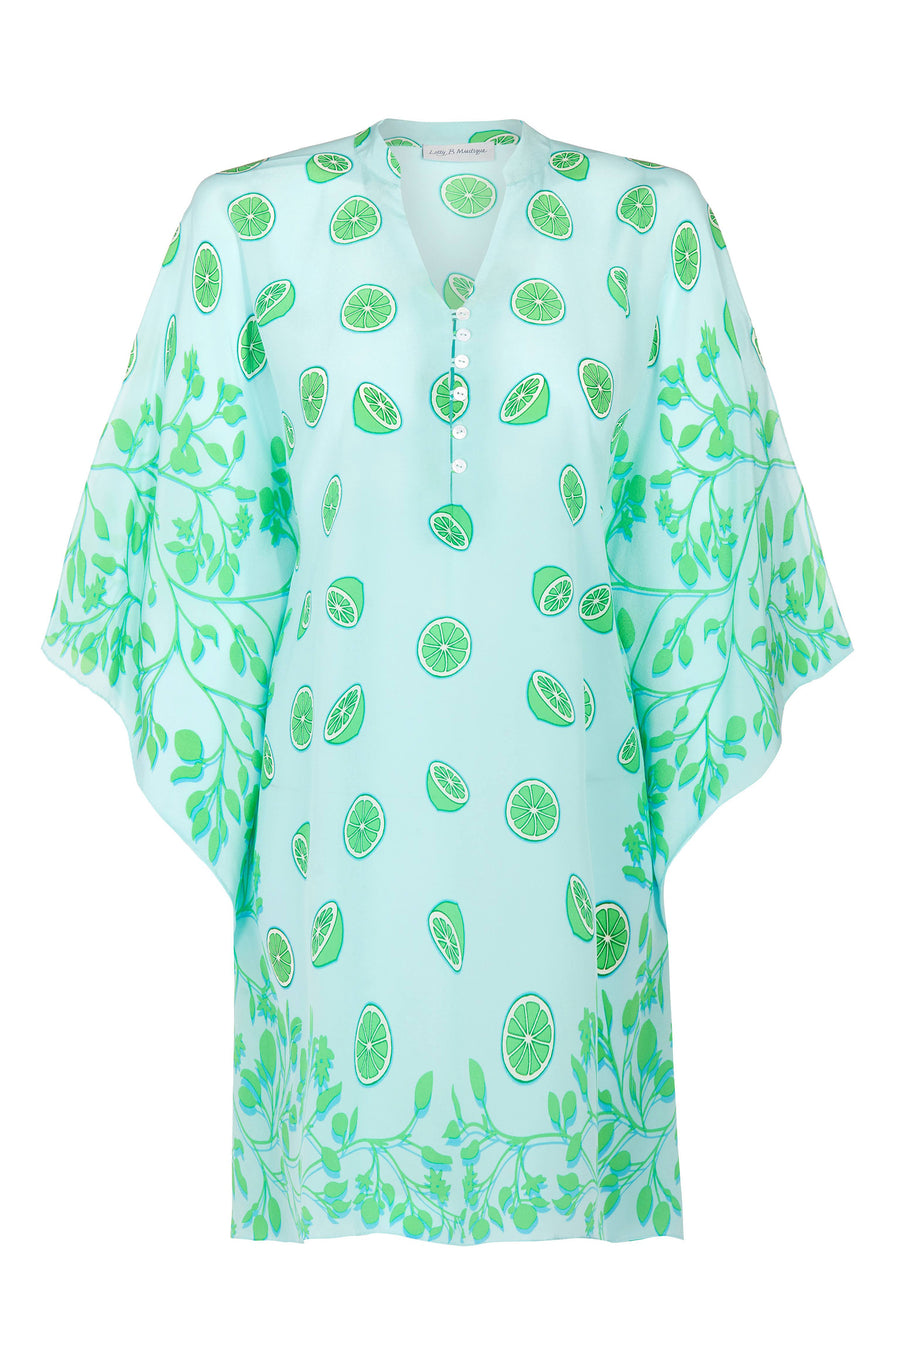 The Lime Tree  "Lotty" kaftan features a short Nehru style collar and deep V neckline fastened with an elegant line of 6 little mother of pearl buttons